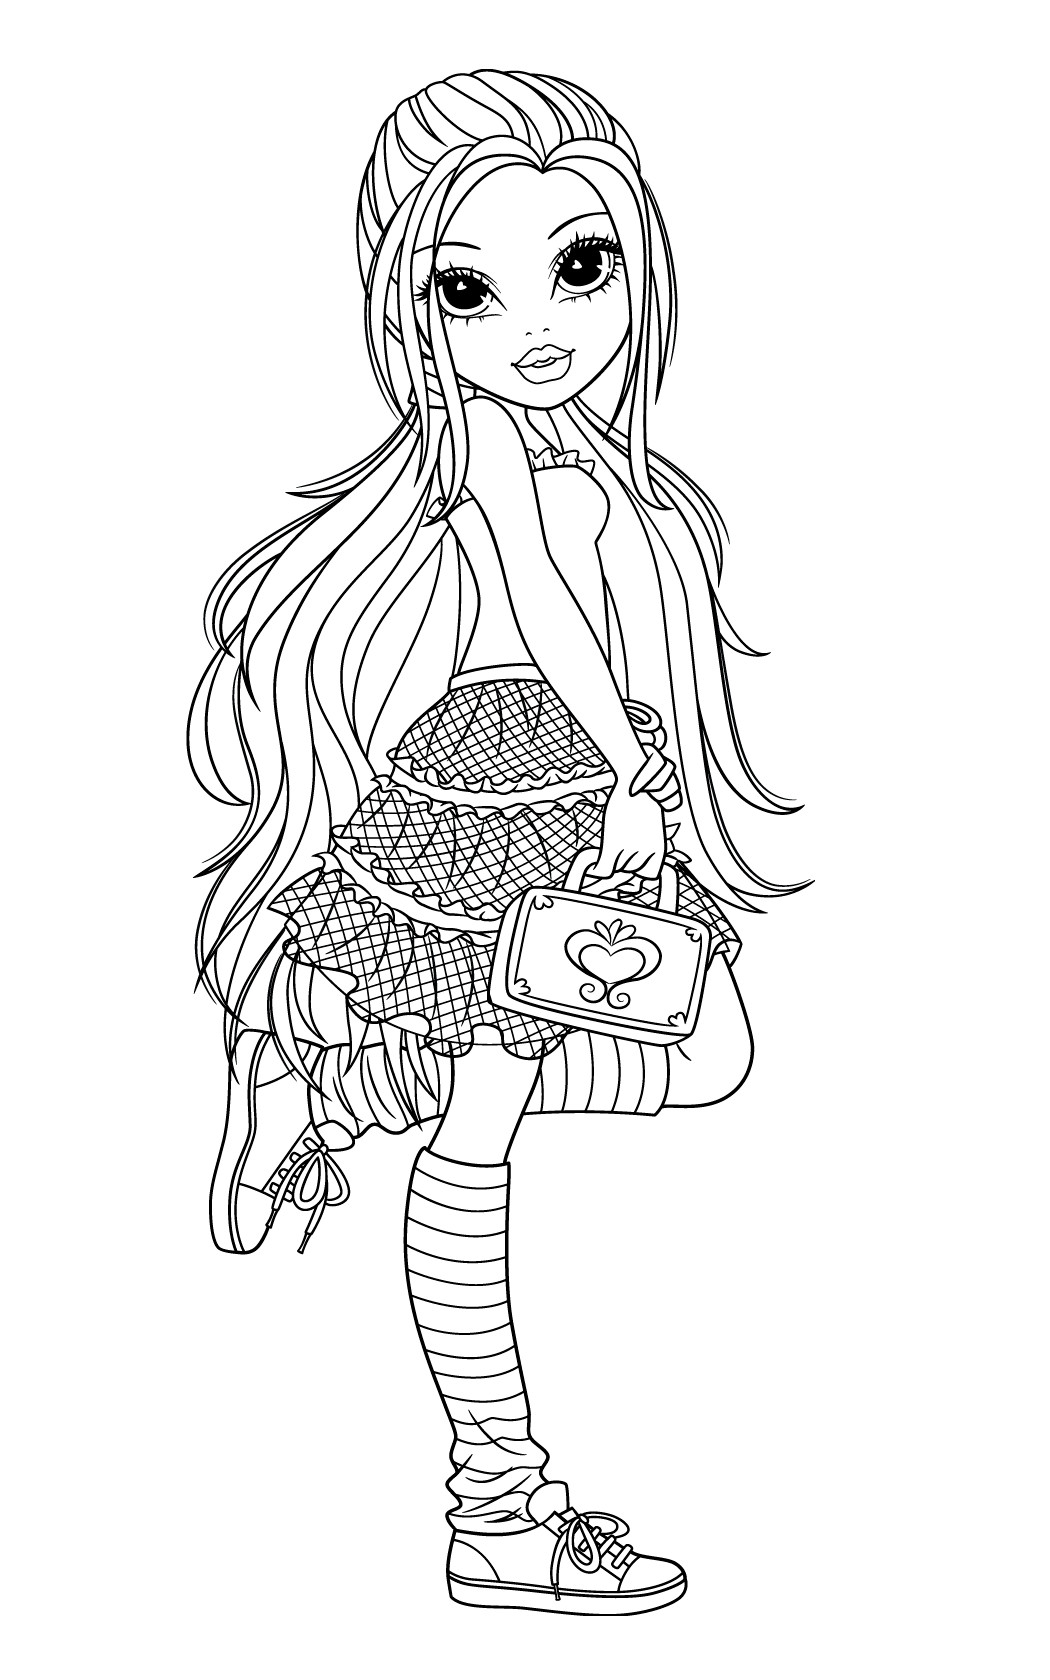 Coloring Book Pages Girls
 New Moxie Girlz Coloring Pages will be added frequently so